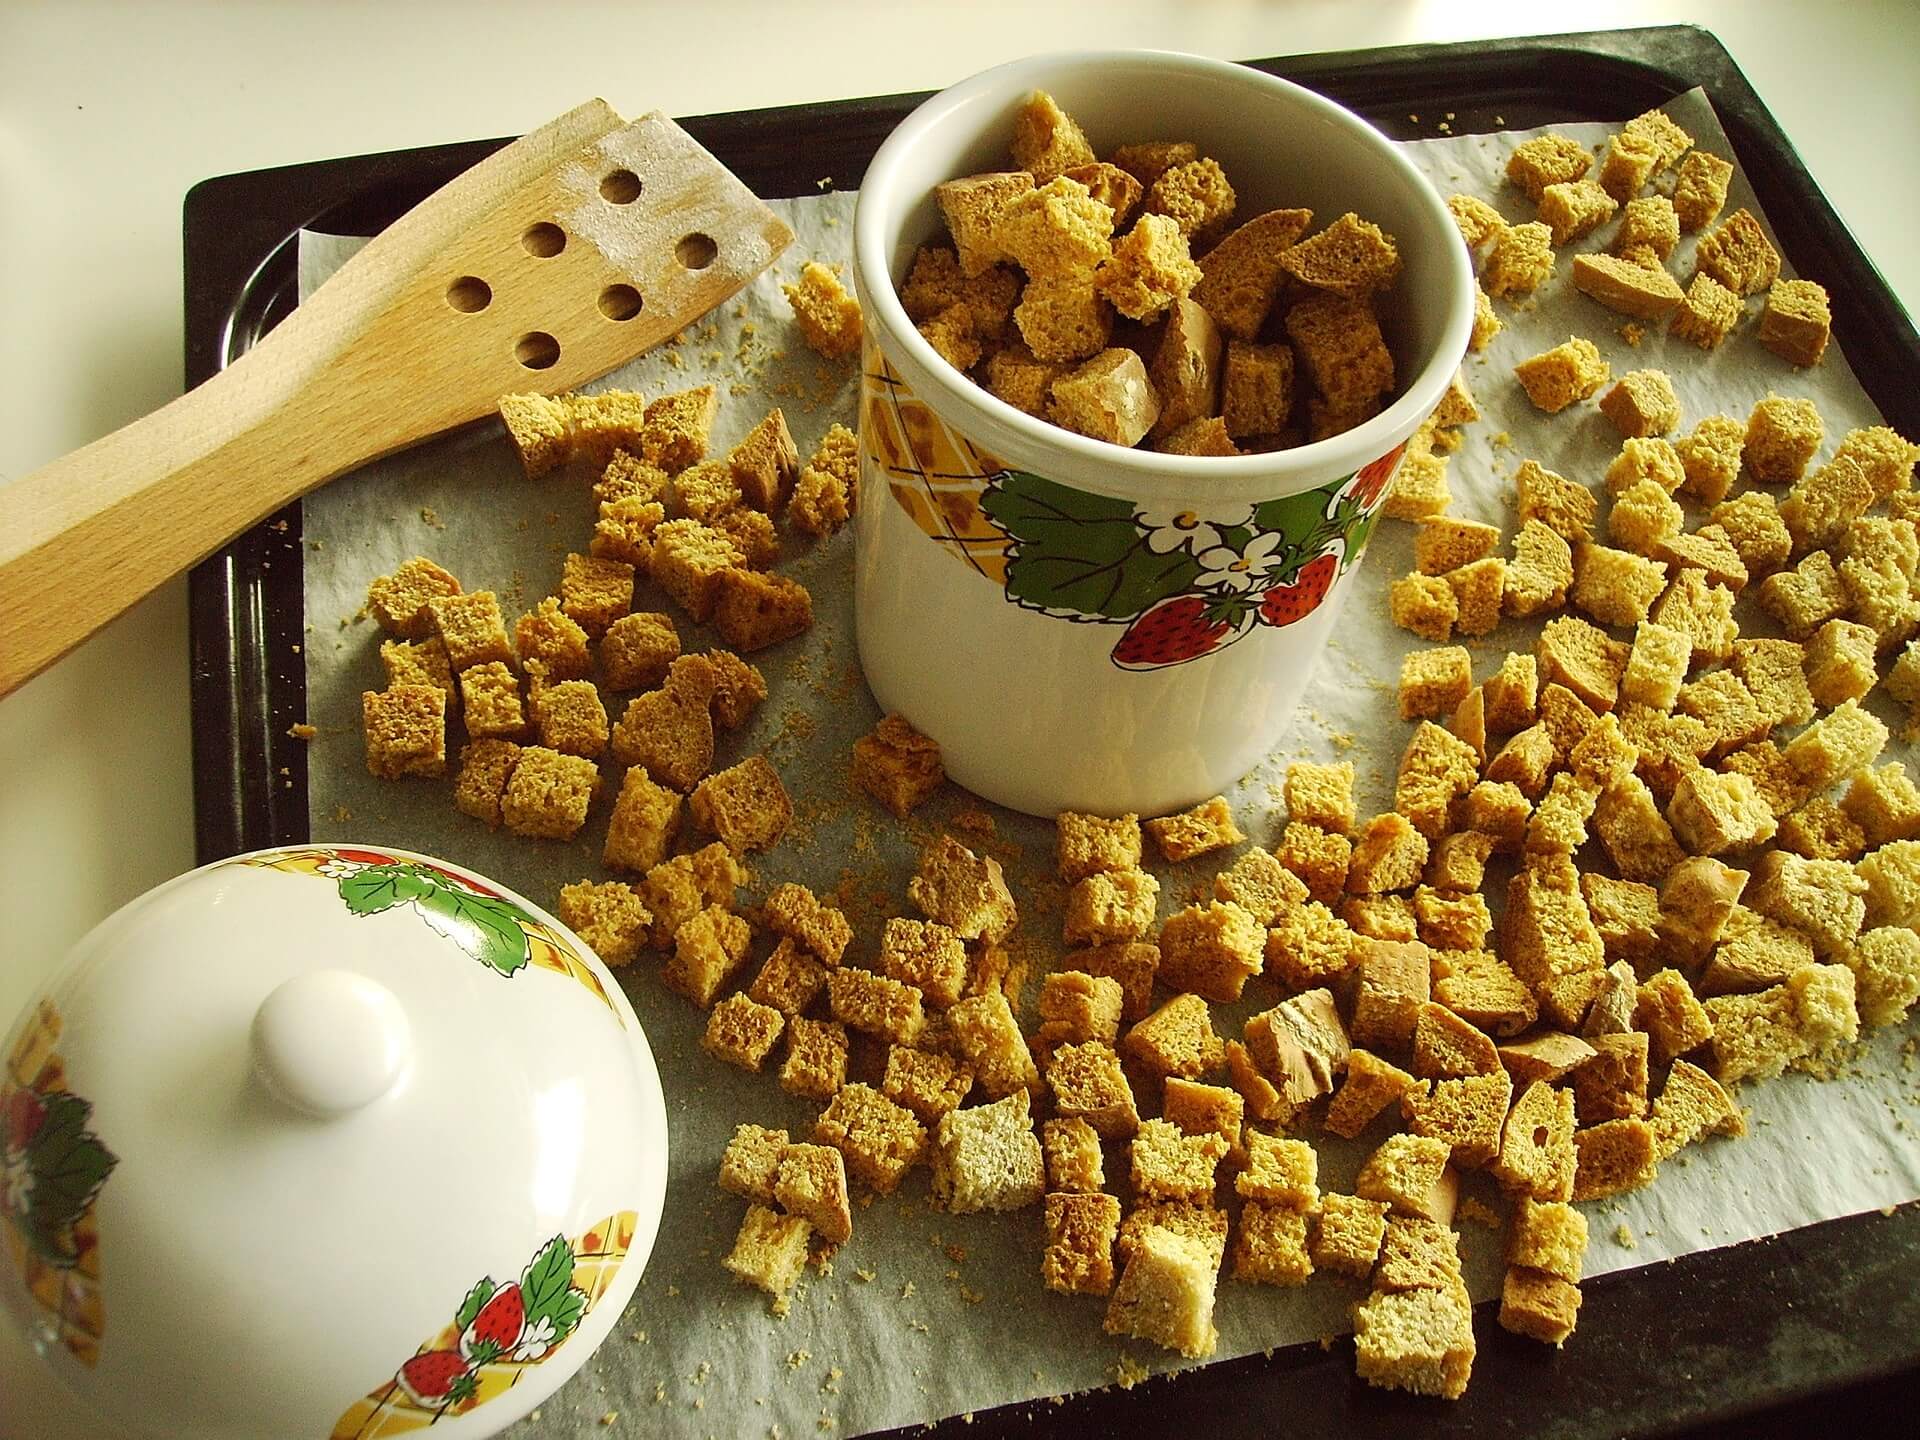 Croutons from Stale Bread